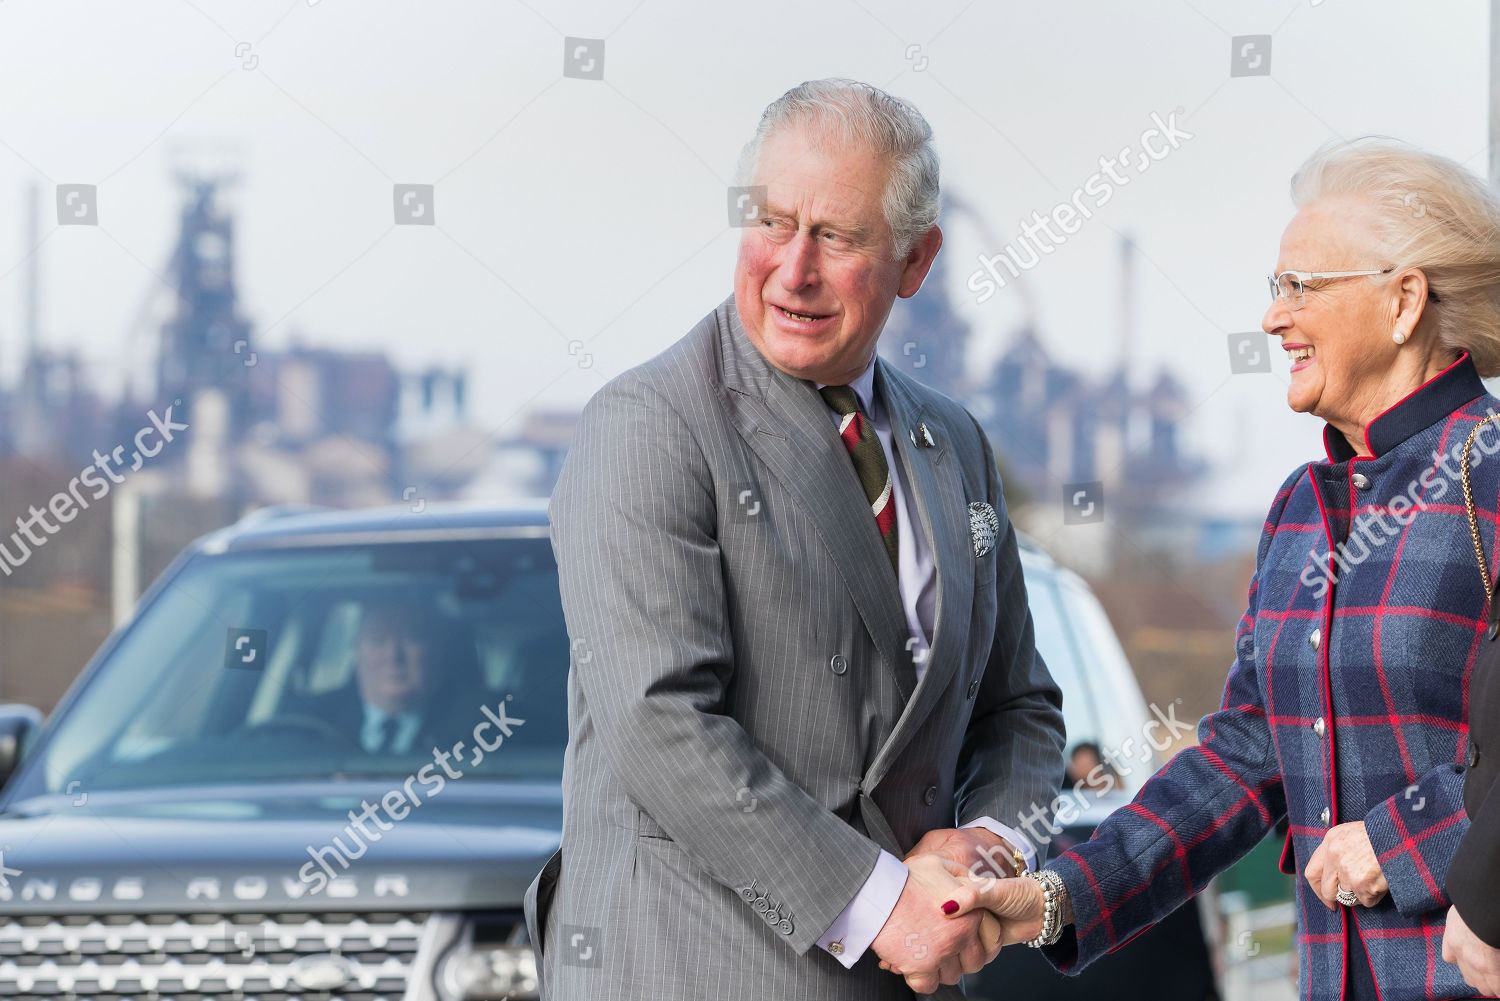 prince-charles-visit-to-wales-uk-shutterstock-editorial-10115952i.jpg